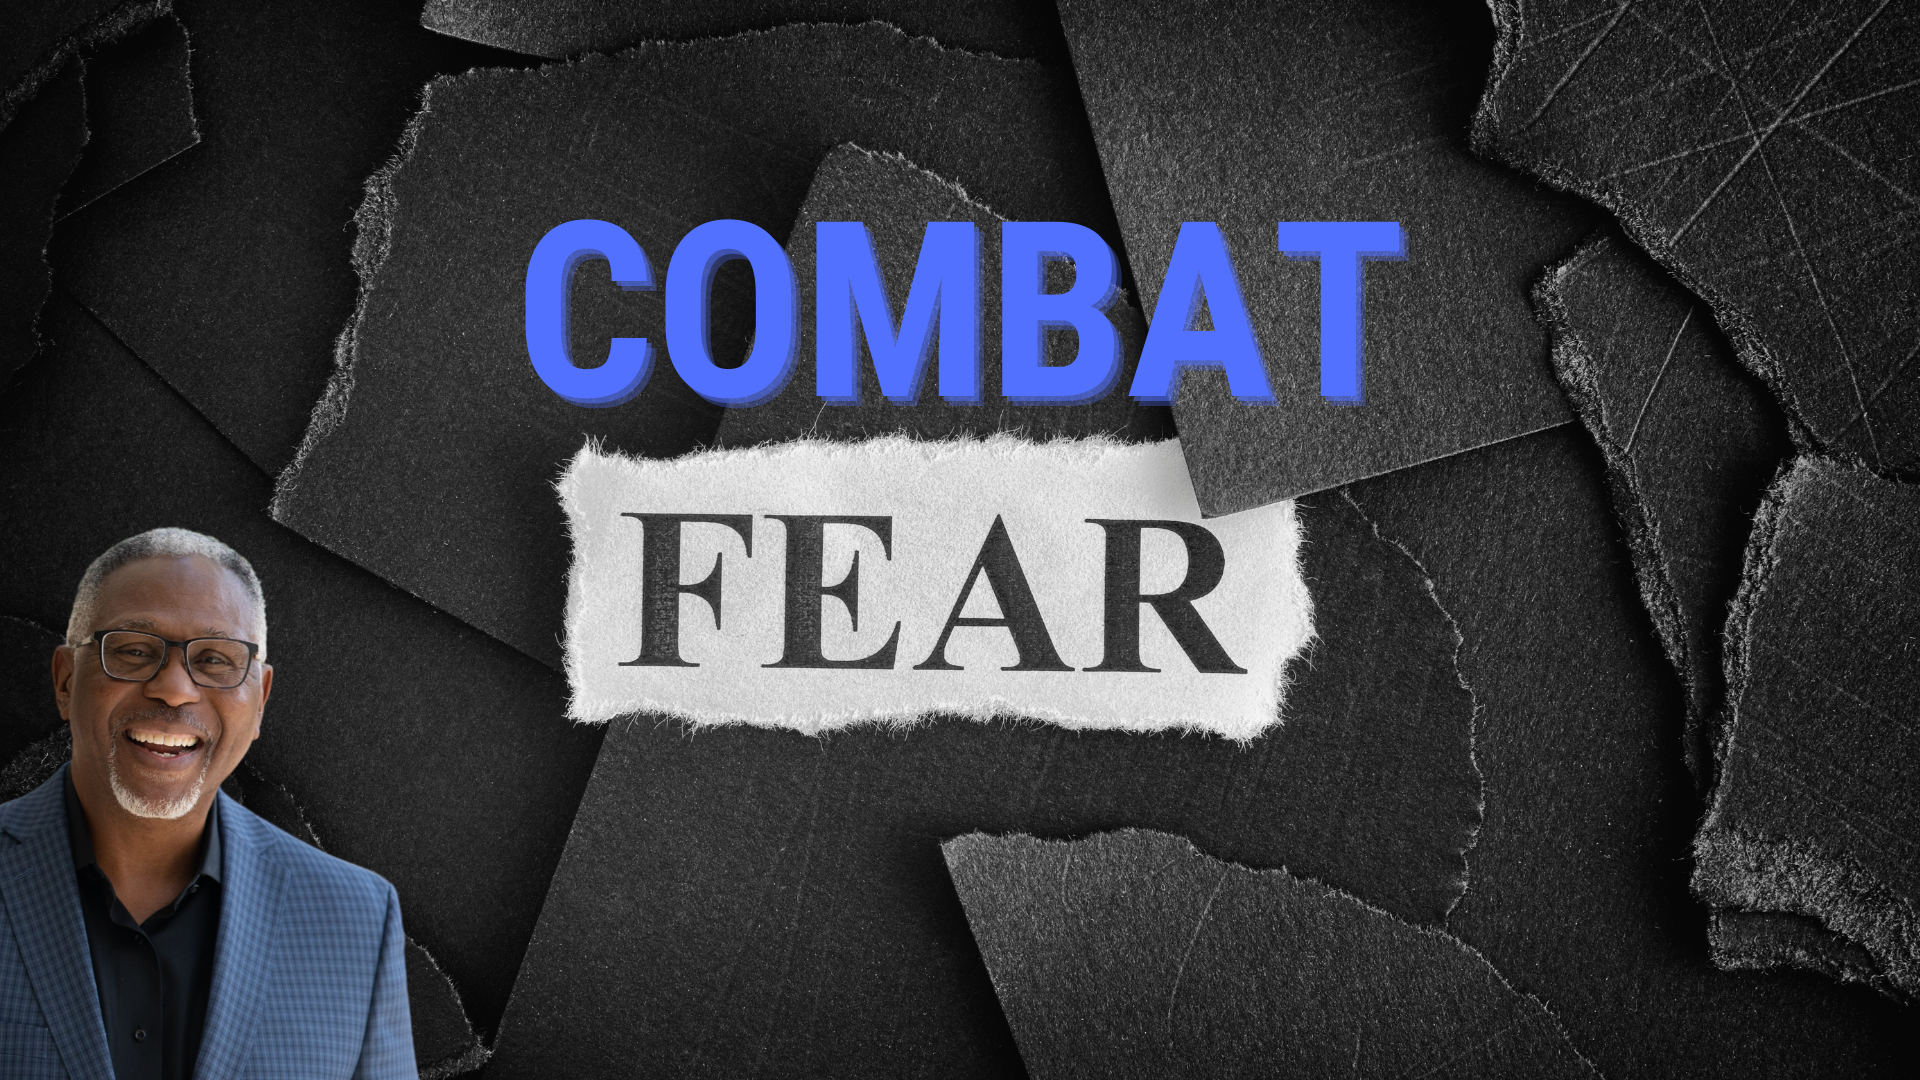 Combat Fear blog featured image